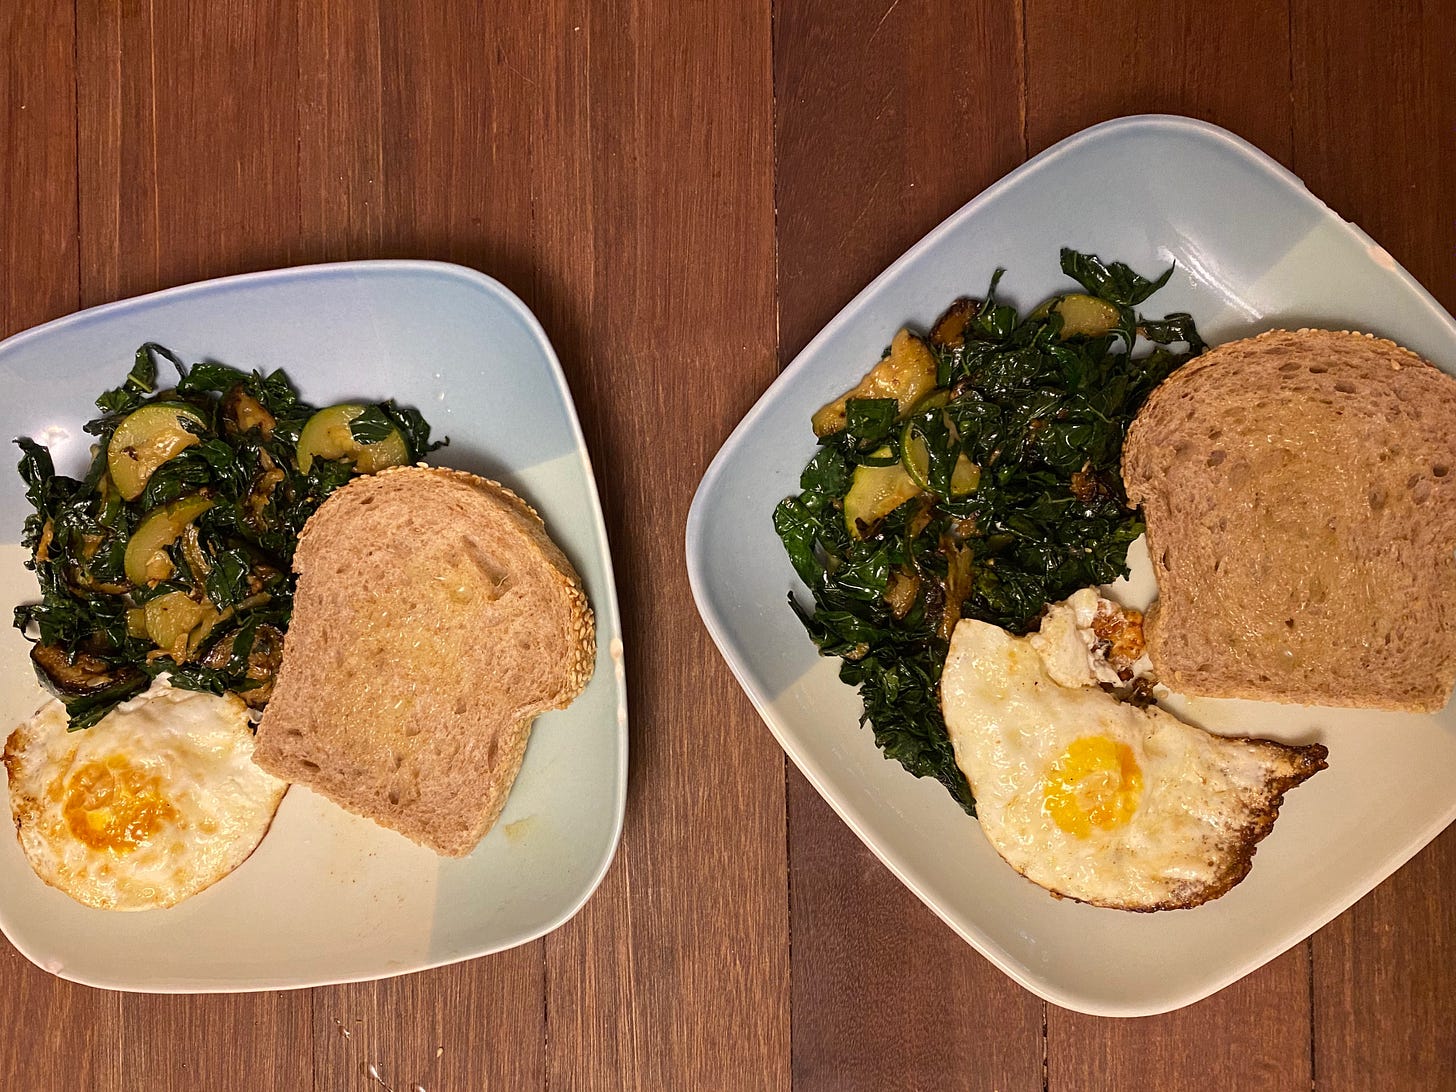 Two square plates on a wooden counter, each filled with a pile of kale and sautéed summer squash, a piece of butter toast, and a fried egg.